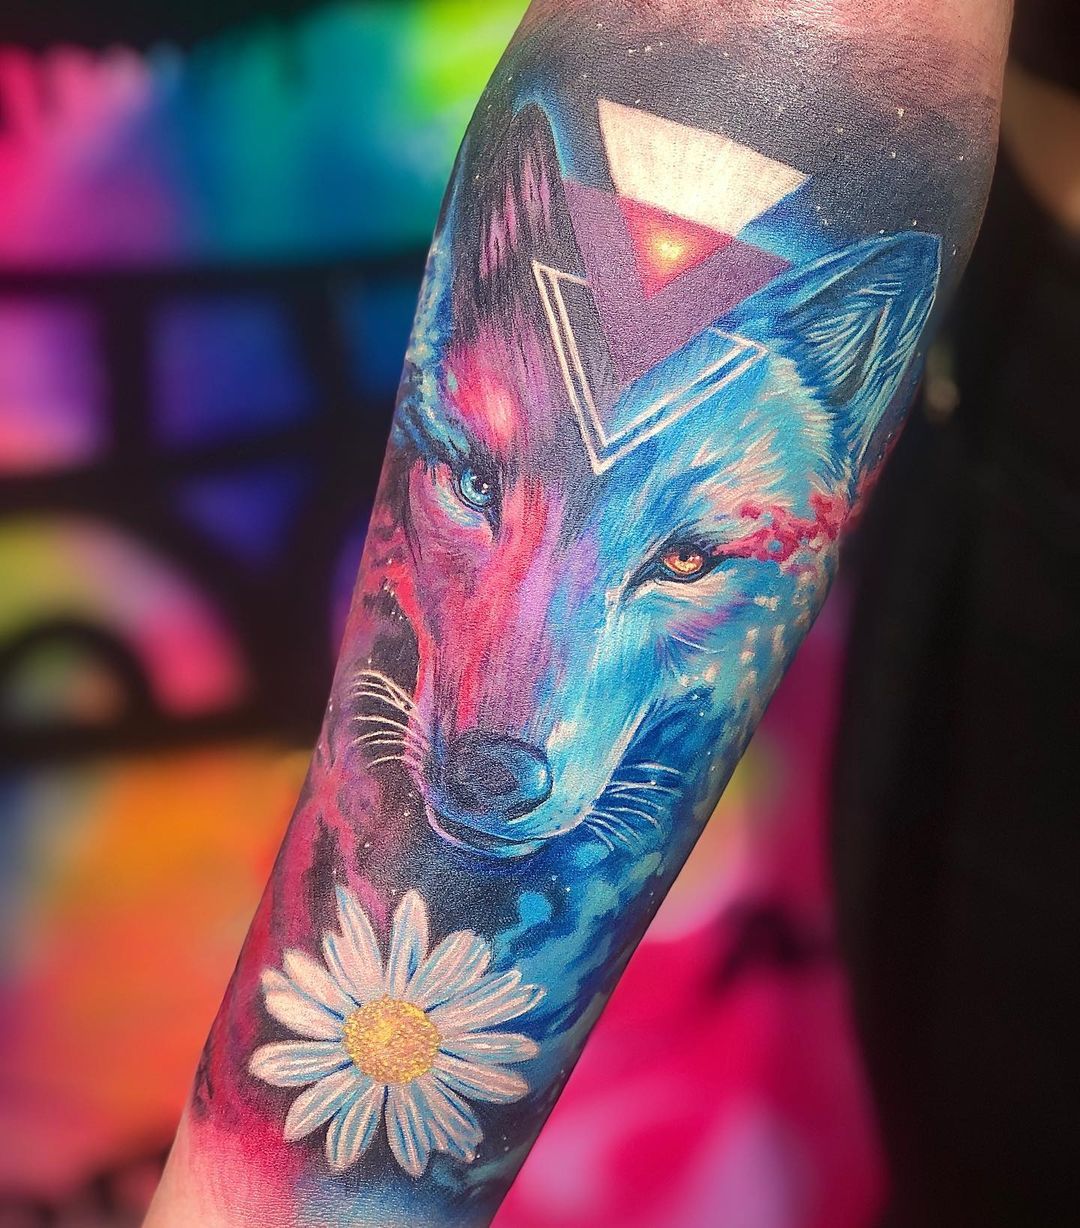 Awsesome Thigh Tattoo Of Brilliant 3D Dotwork Wolf Face